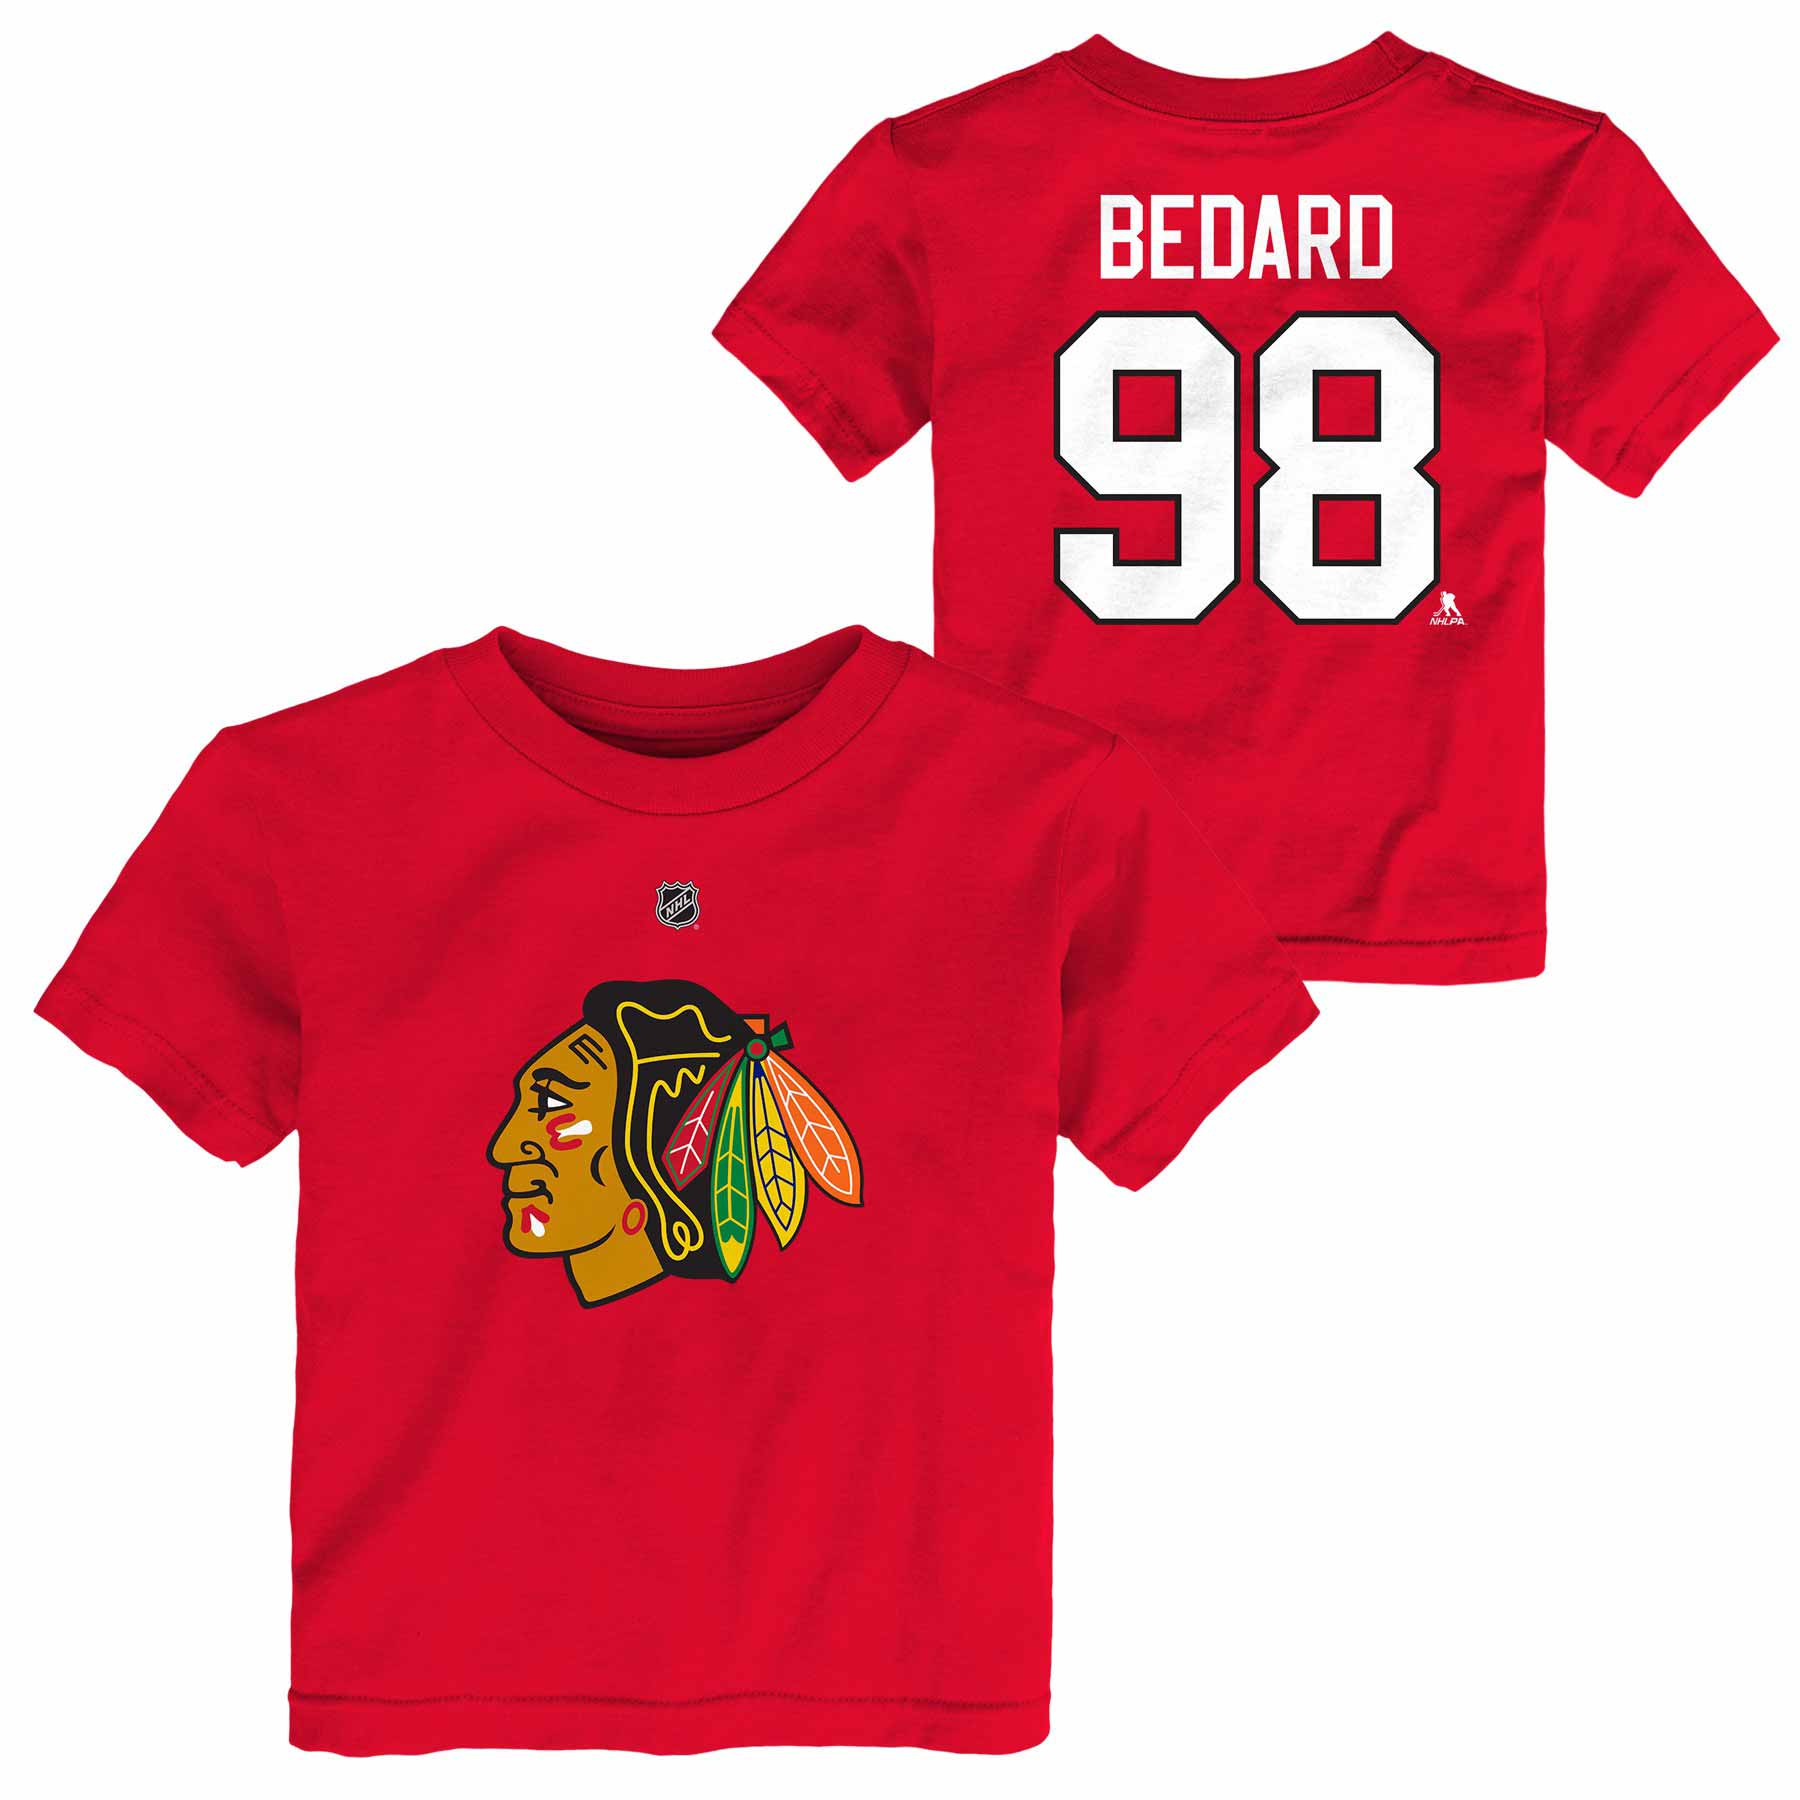 The Connor Bedard Boost: Blackhawks Tickets, Merch Sales Up - The